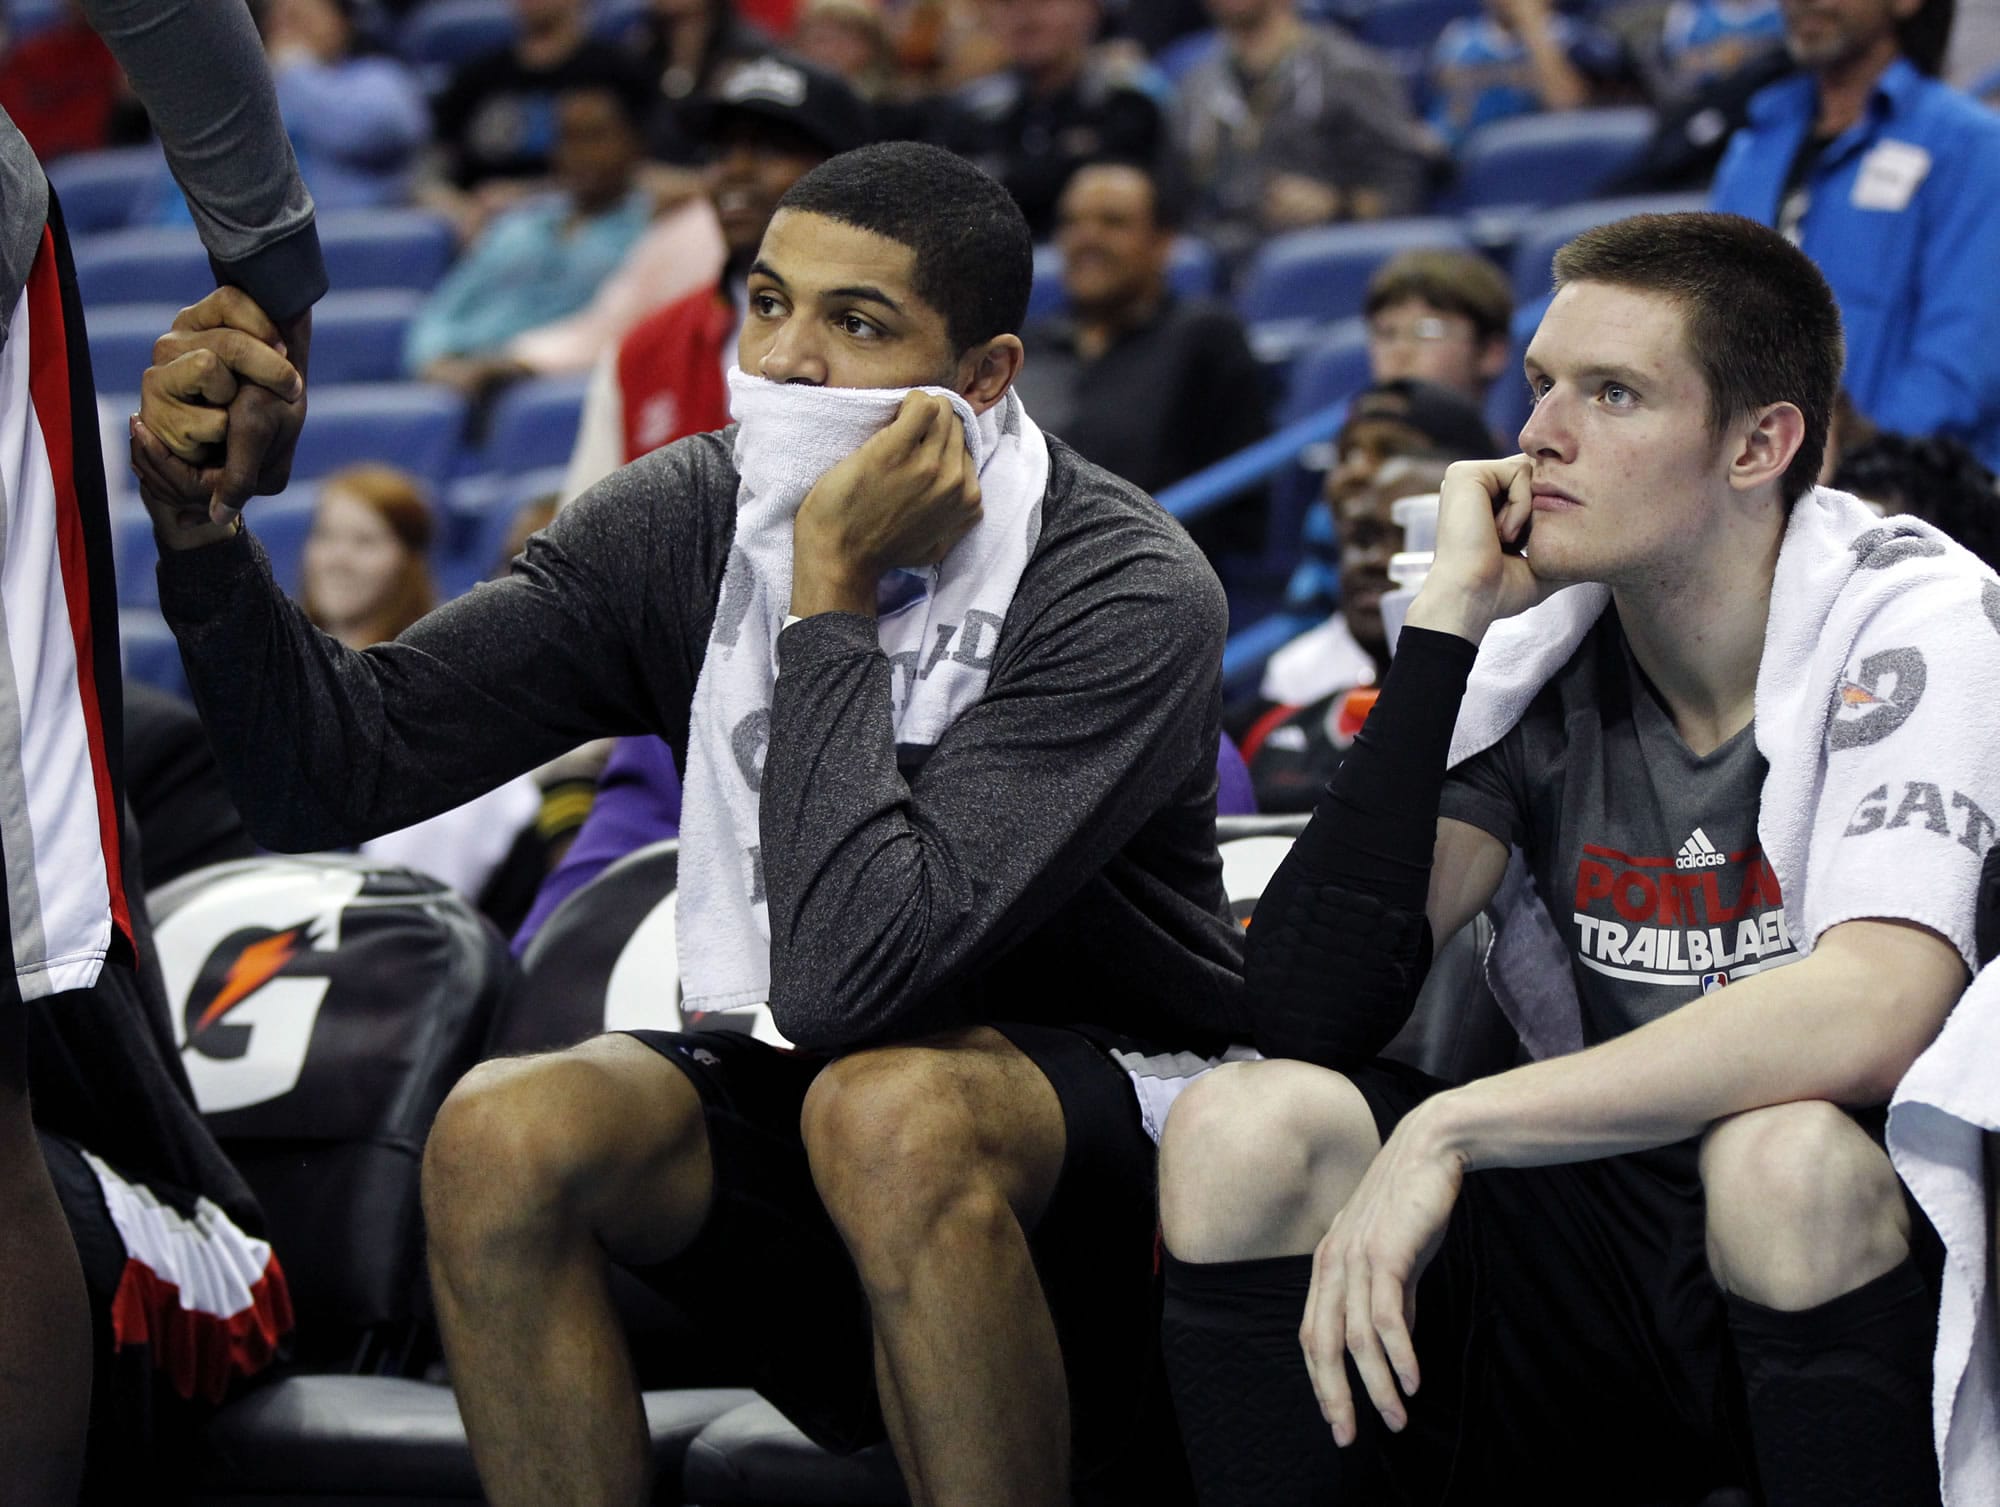 Nicolas Batum watches with forward Luke Babbitt, right, in the second half of an NBA basketball game against the New Orleans Hornets in New Orleans.